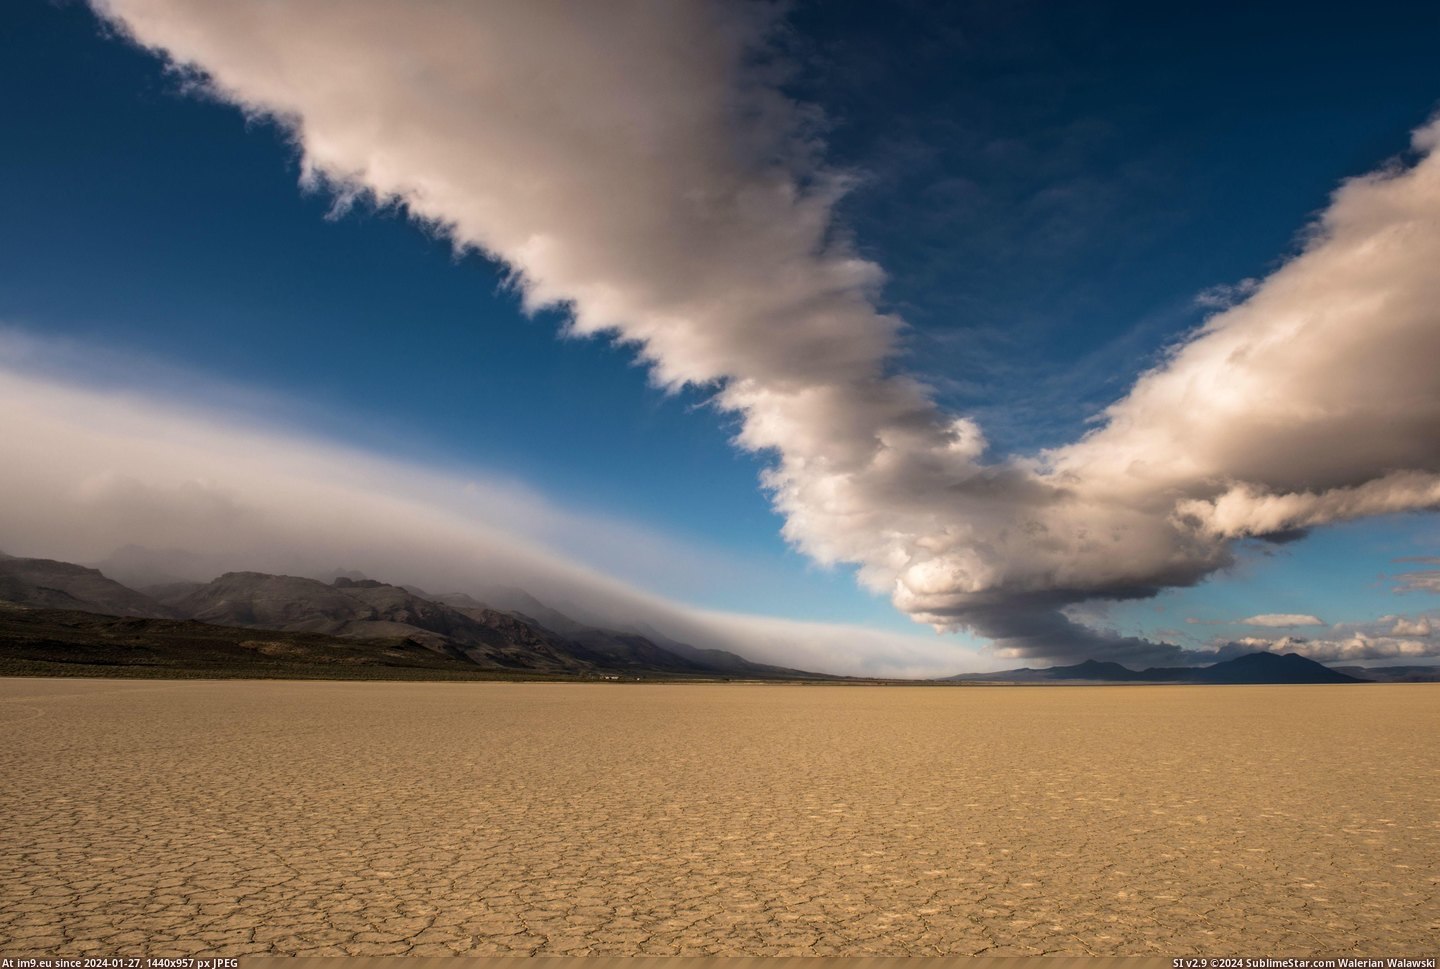 #Massive #Sky #Desert #Carried #Wind #Tunnels #Clouds #Incredible #Shape [Earthporn] Massive wind tunnels carried these clouds in an incredible 'V' shape through the sky in the Alvord Desert, OR  [4416 Pic. (Bild von album My r/EARTHPORN favs))